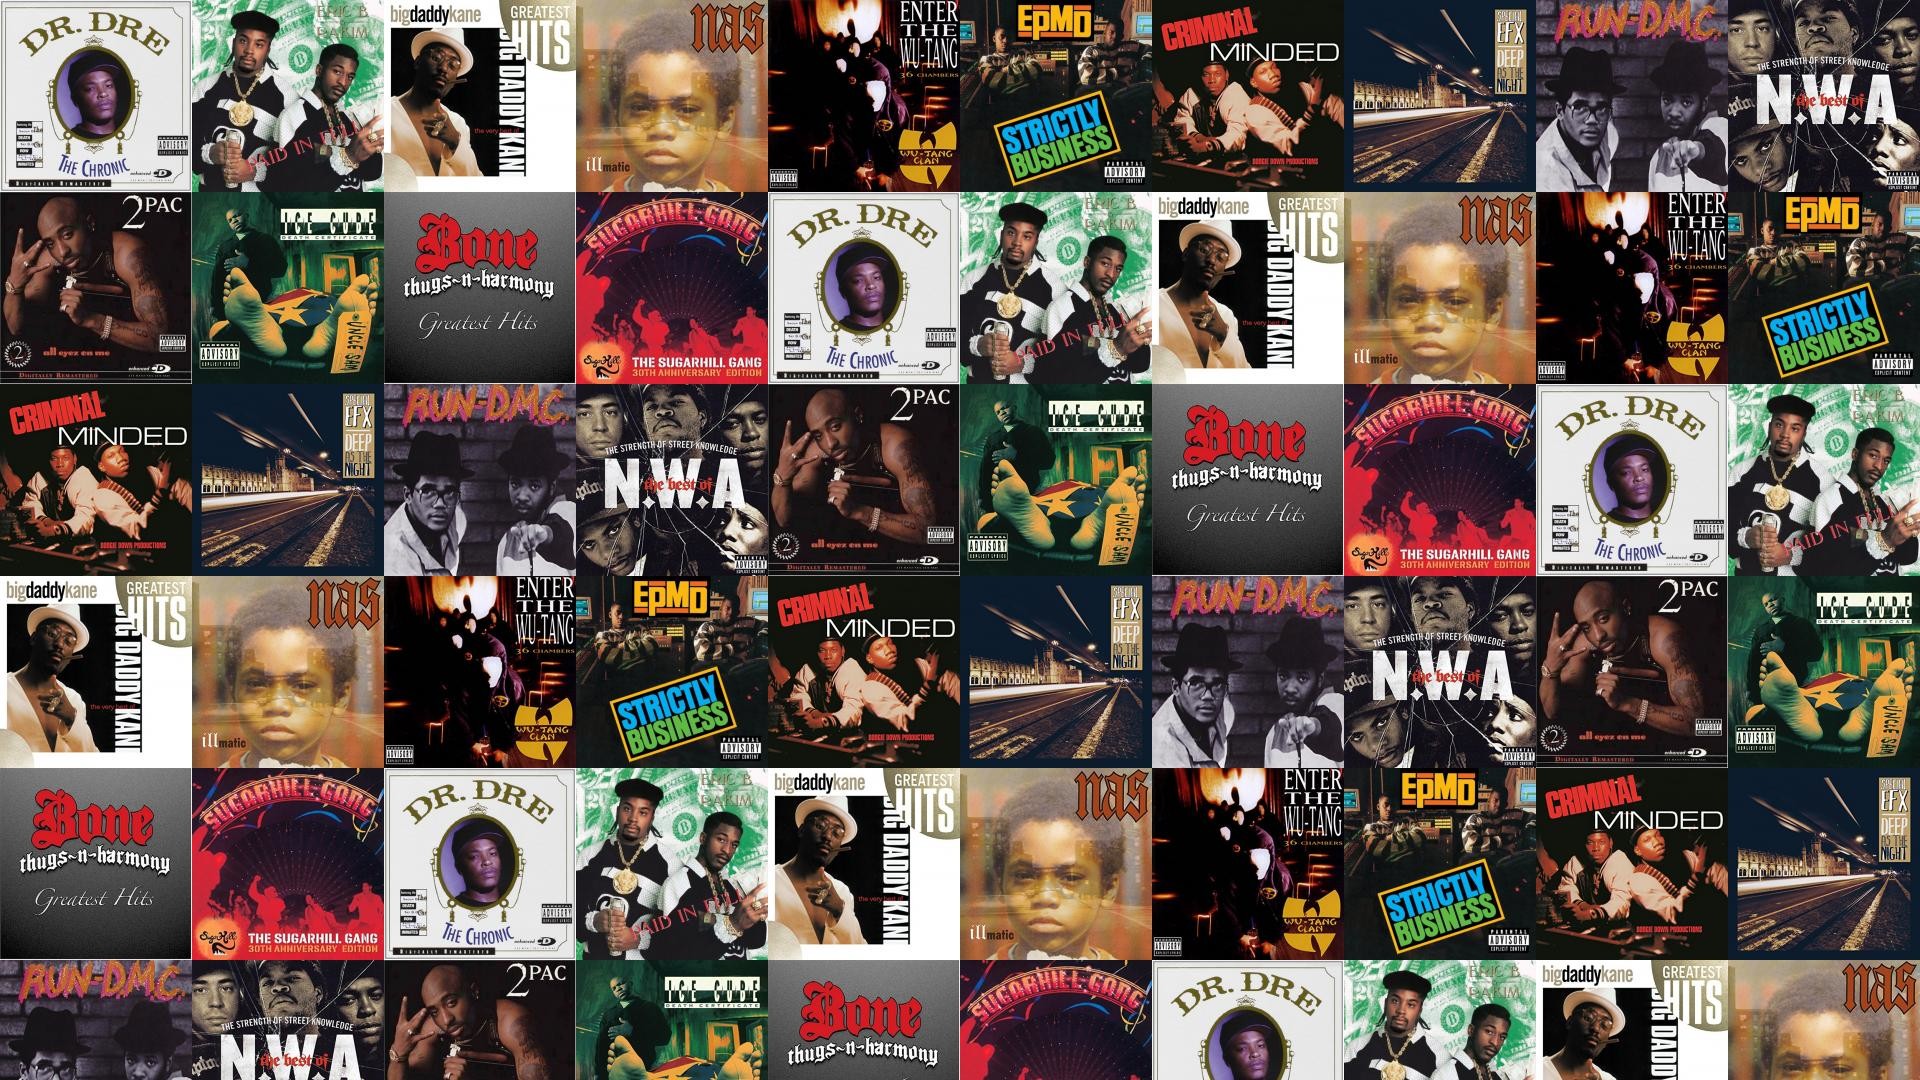 1920x1080 Download this free wallpaper with images of Dr. Dre – , Rakim – , Big Daddy  Kane – , Nas – , Wu-tang – , Epmd – , Boogie Down Productions – ...